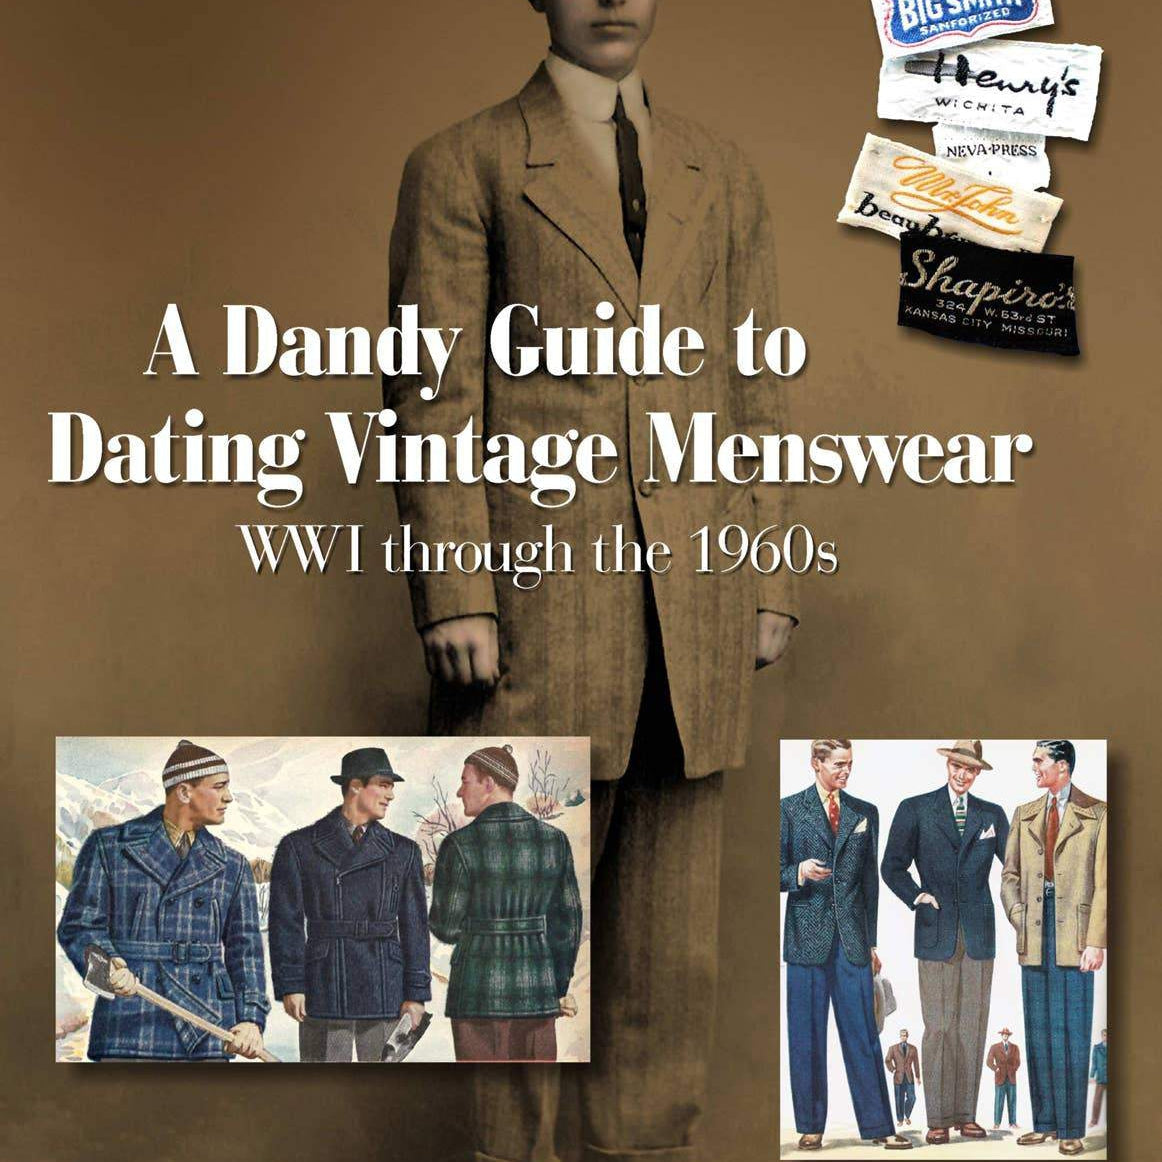 A Dandy Guide to Dating Vintage Menswear-Schiffer Publishing-MILWORKS